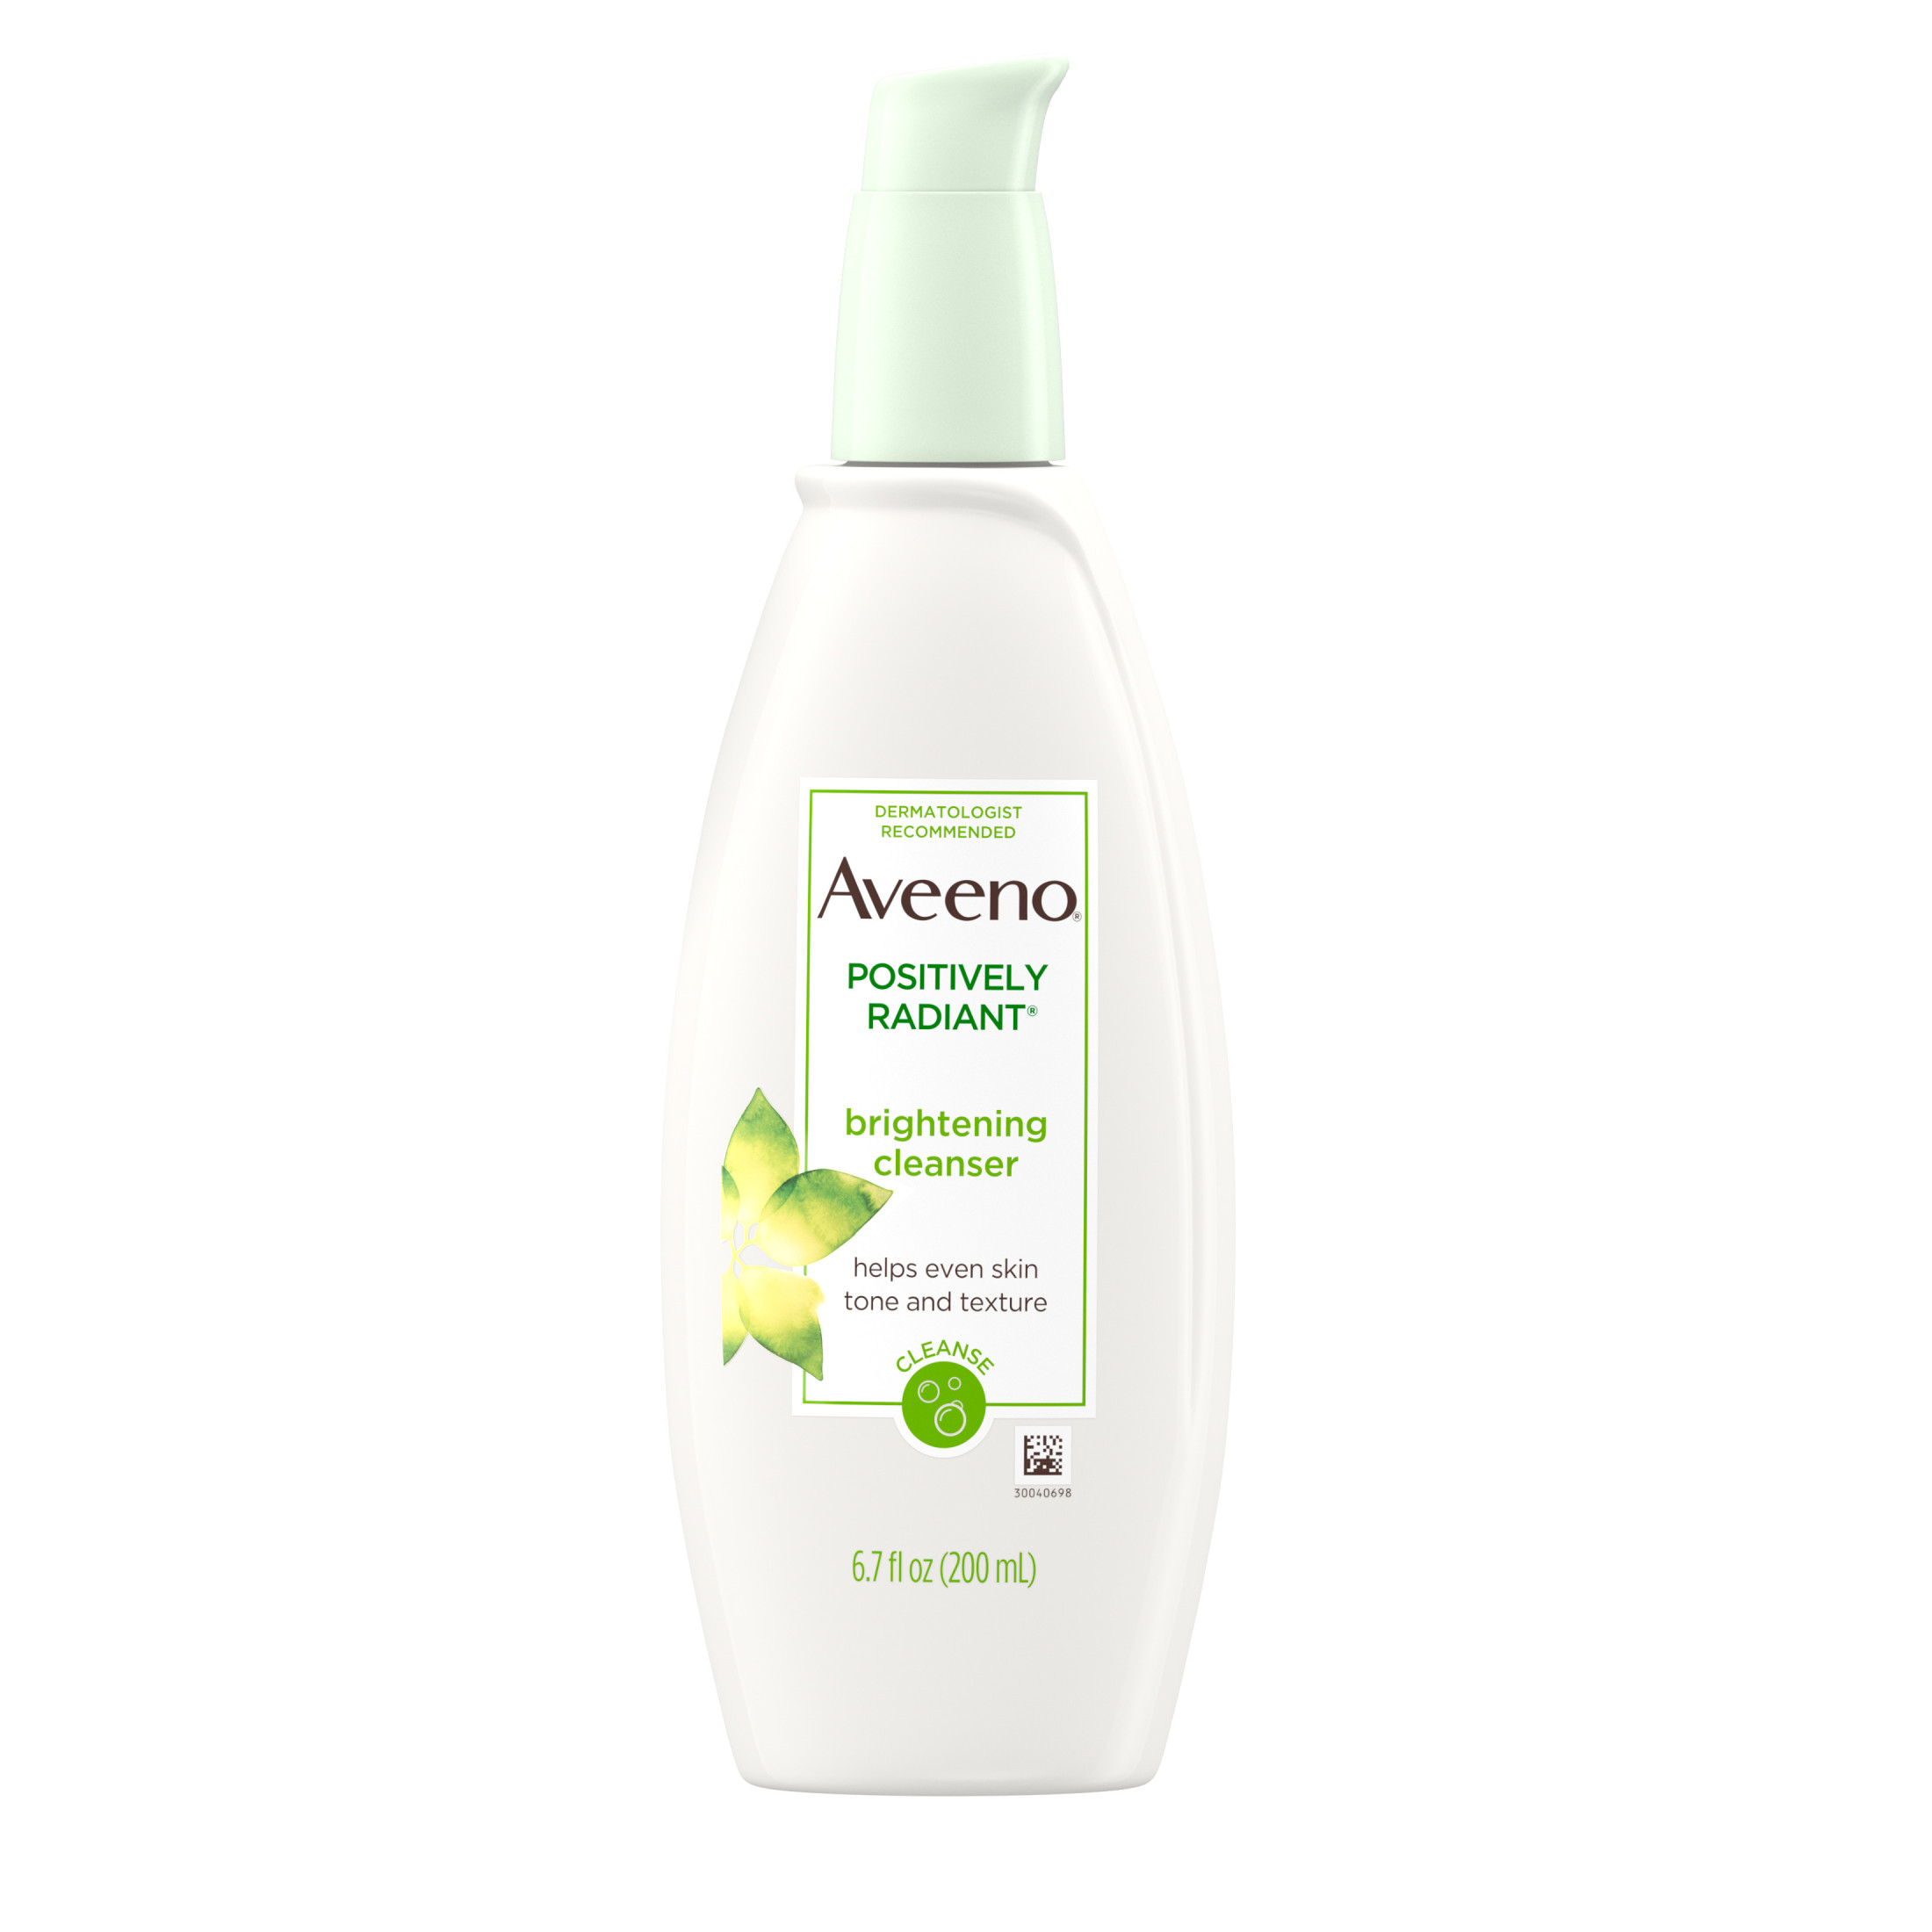 Aveeno Positively Radiant Brightening Facial Cleanser, 6.7 fl. oz - image 1 of 6